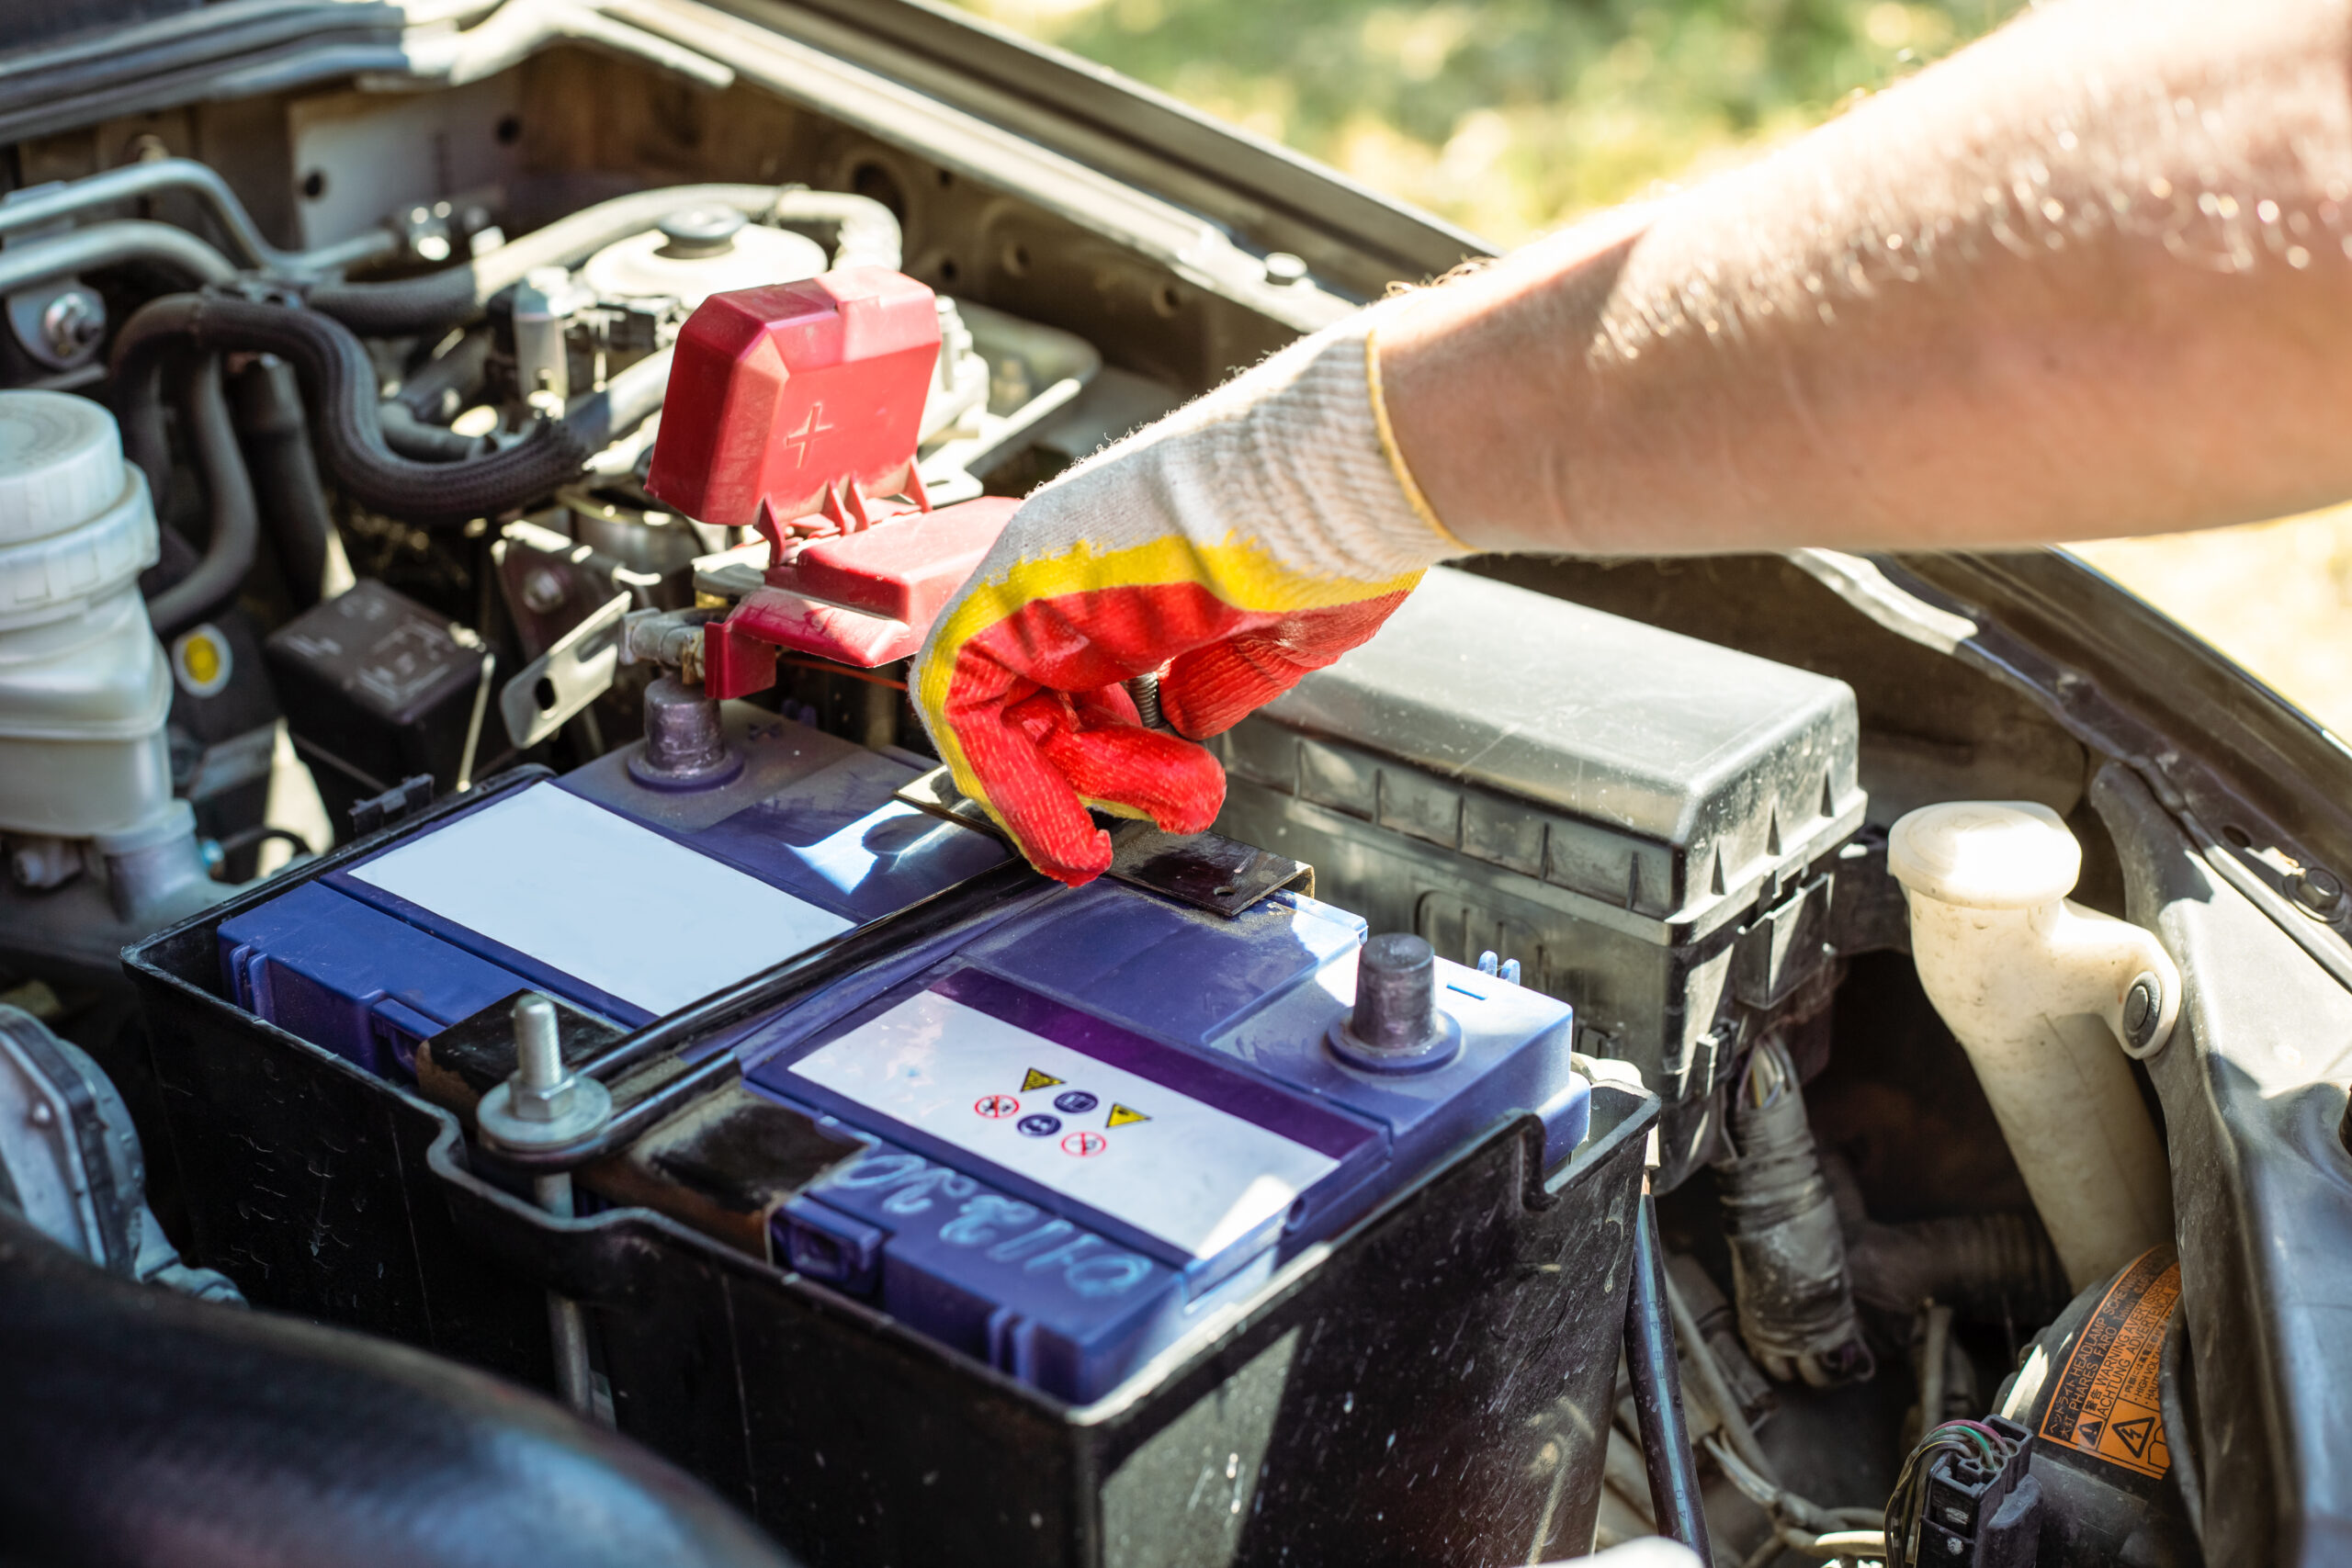 Car Battery Replacement. The Car Mechanic Repairs The Car, Unscr